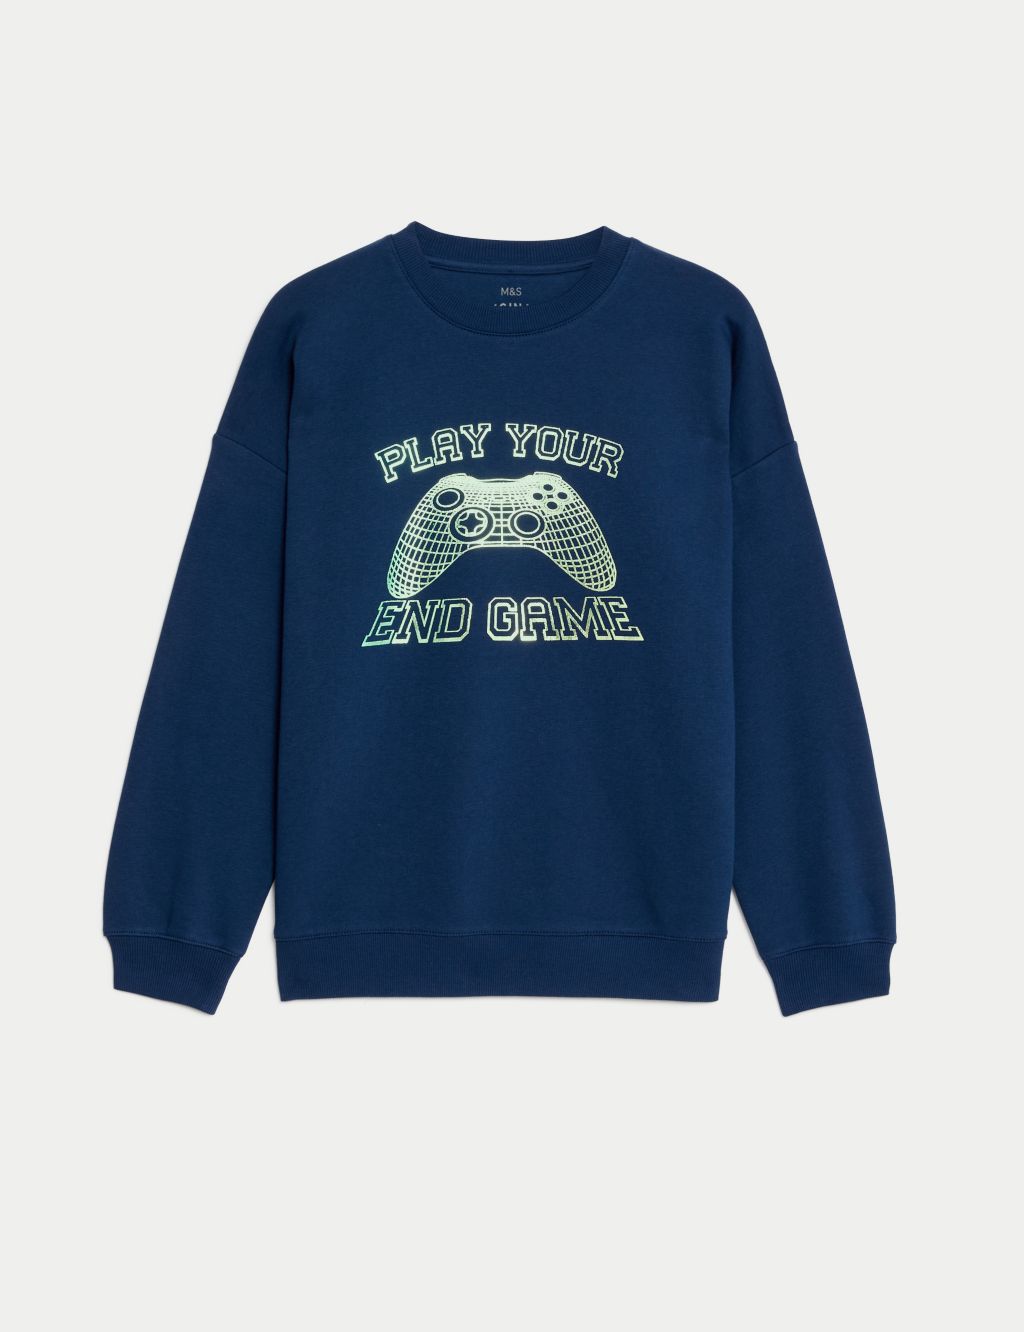 Cotton Rich Play Your End Game Sweatshirt (6-16 Yrs)